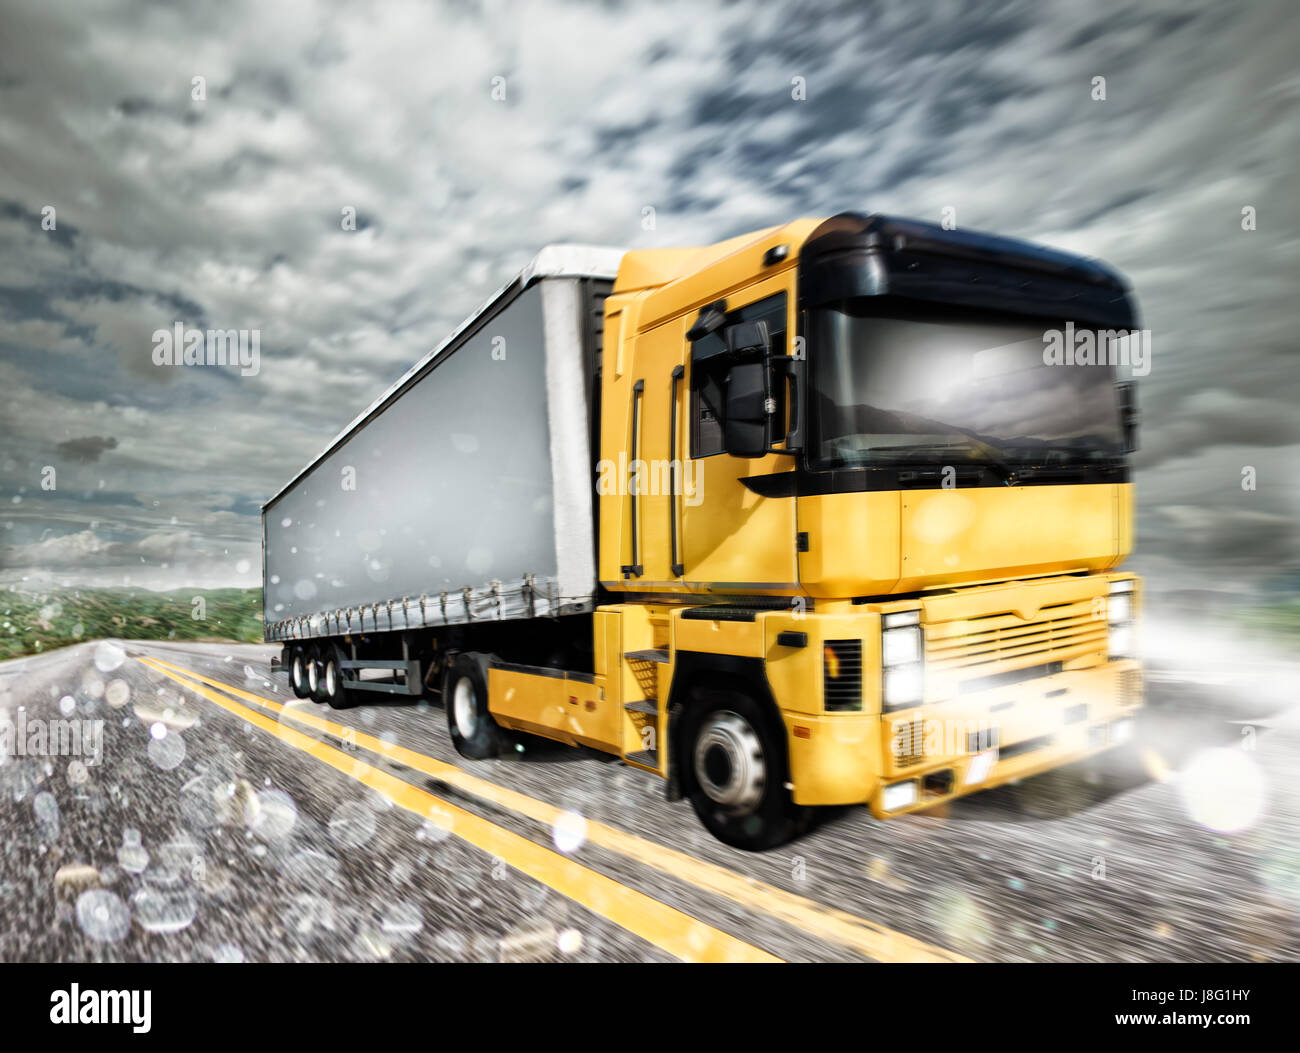 Transporter truck on a highway during storm Stock Photo